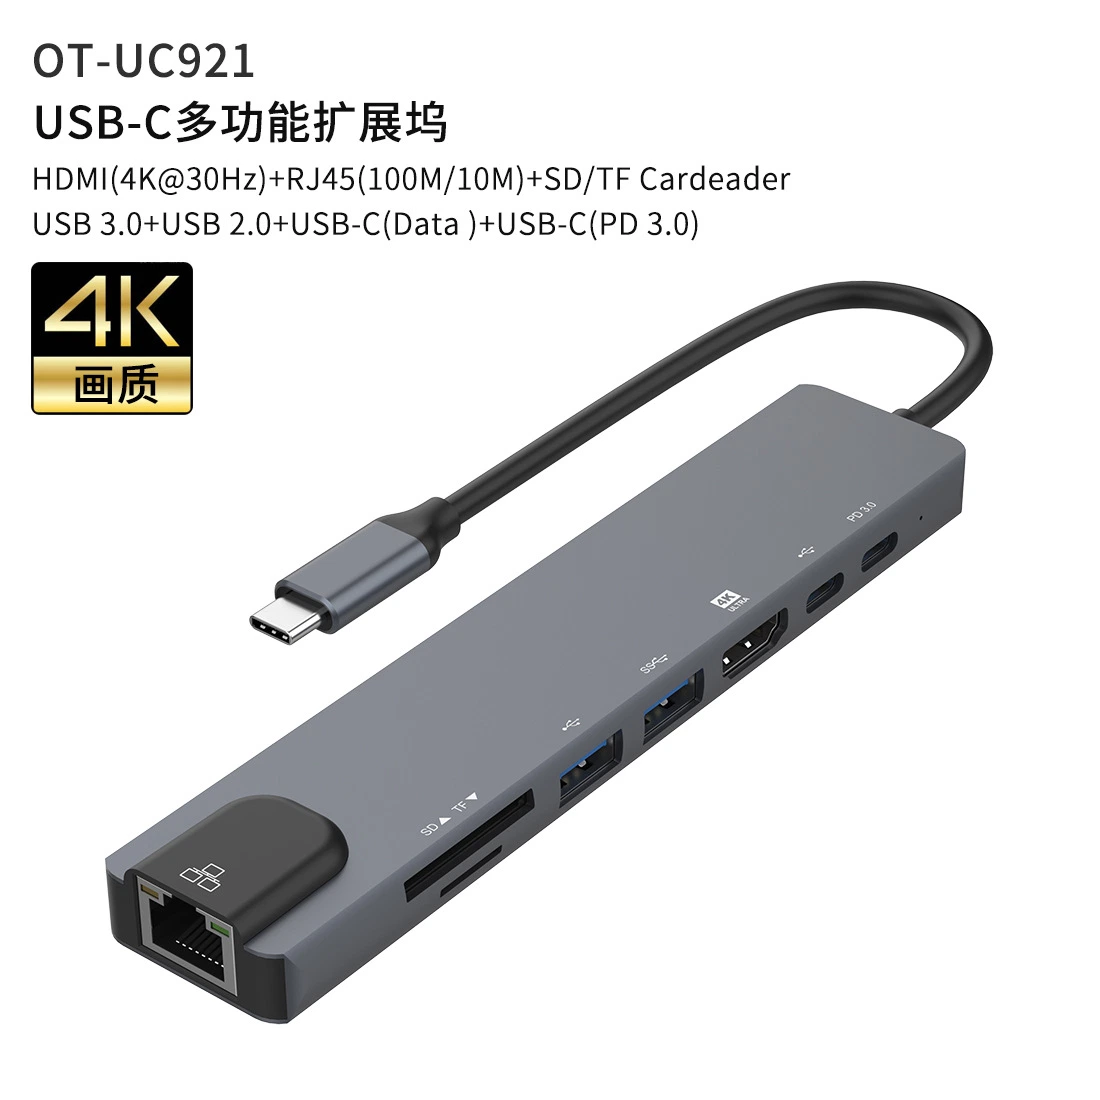 8-in-1 Docking Station USB-C to HDMI Cable 4K@30Hz Type-C Expansion Hub